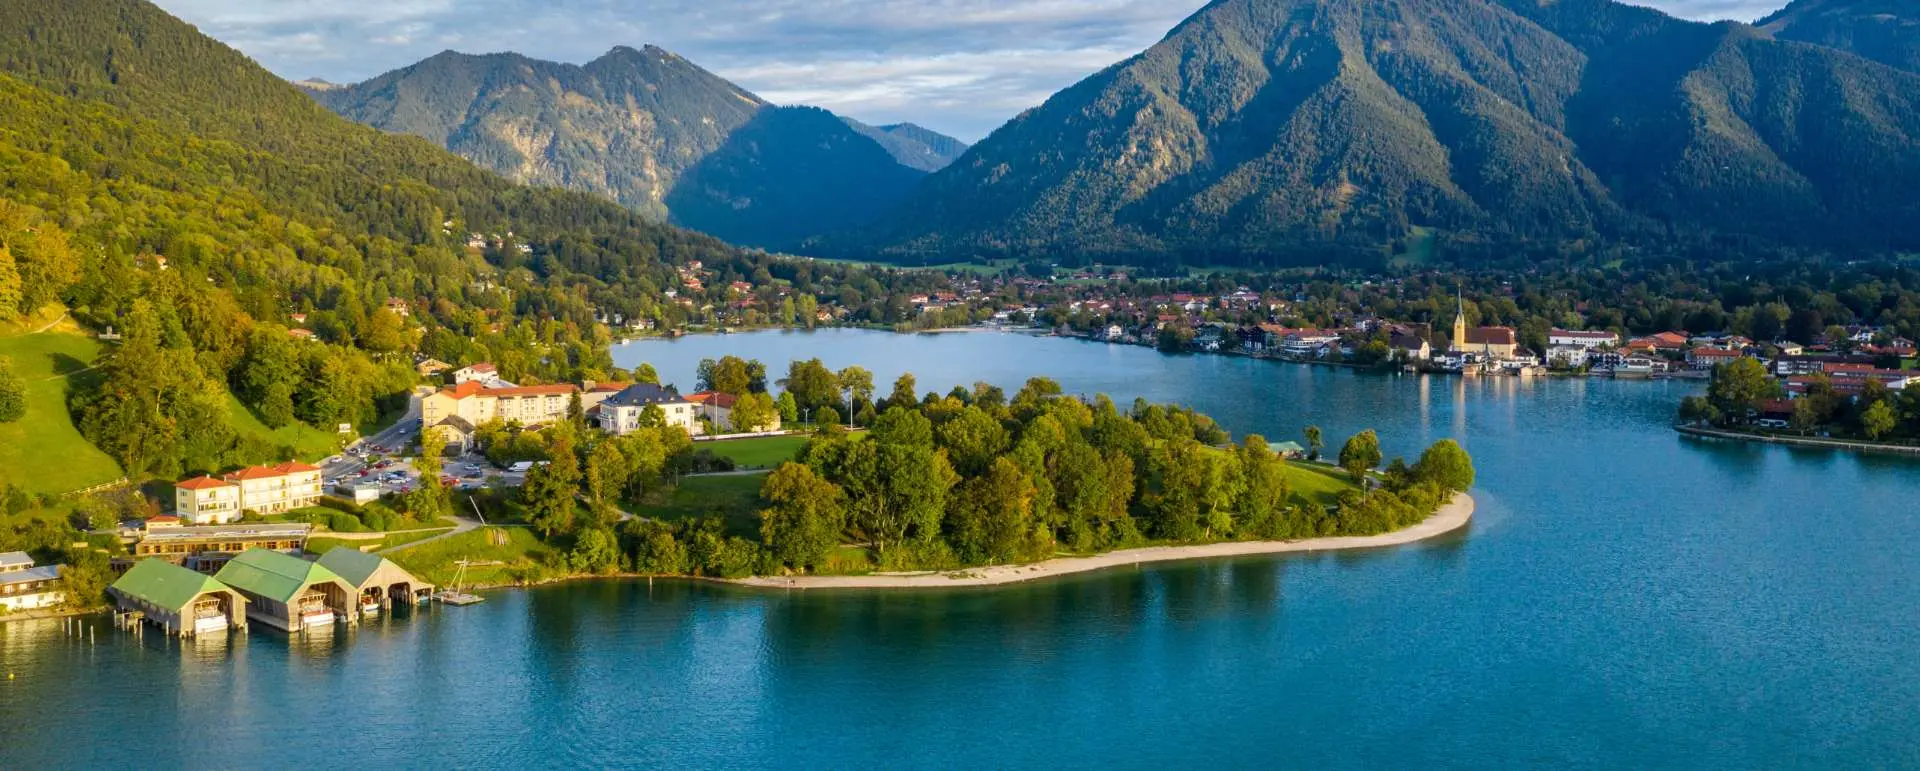 Tegernsee - the destination for affordable group accomodations